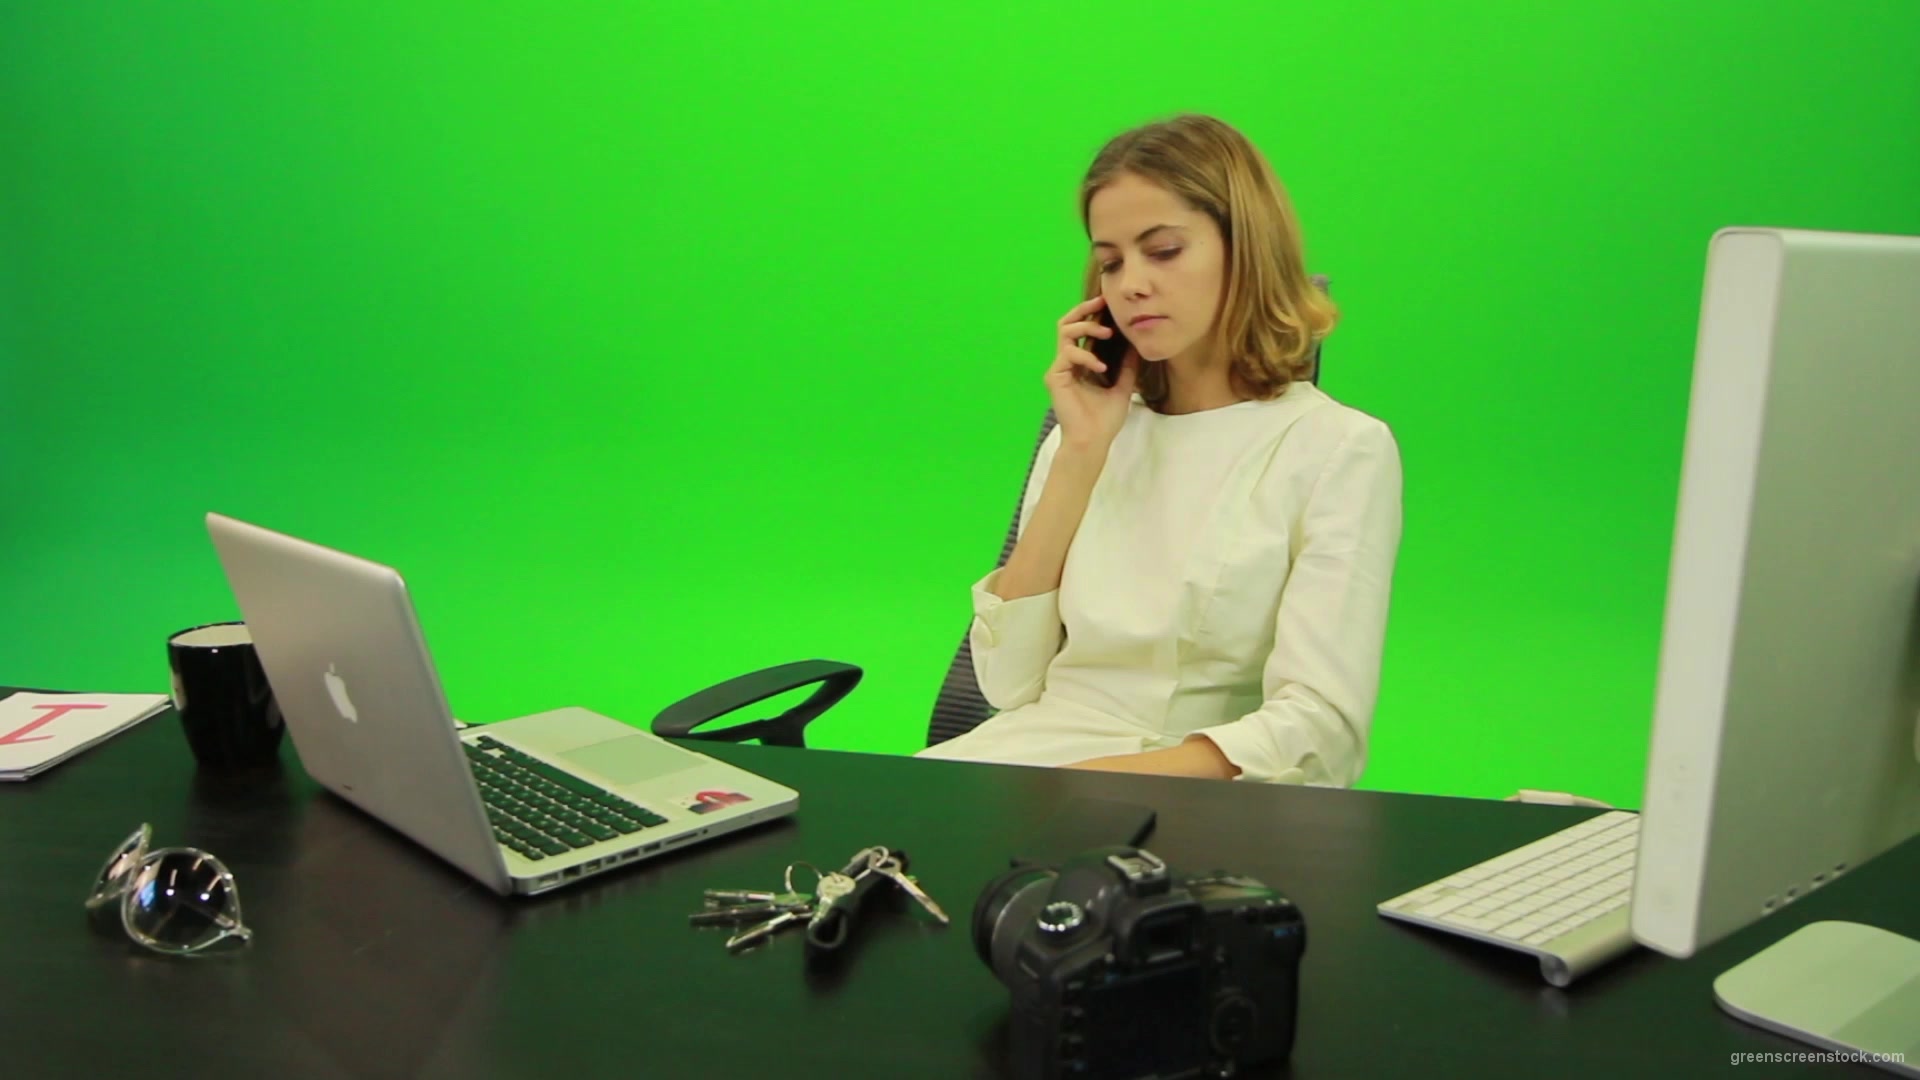 Laughing-Business-Woman-is-Talking-on-the-Phone-Green-Screen-Footage_001 Green Screen Stock